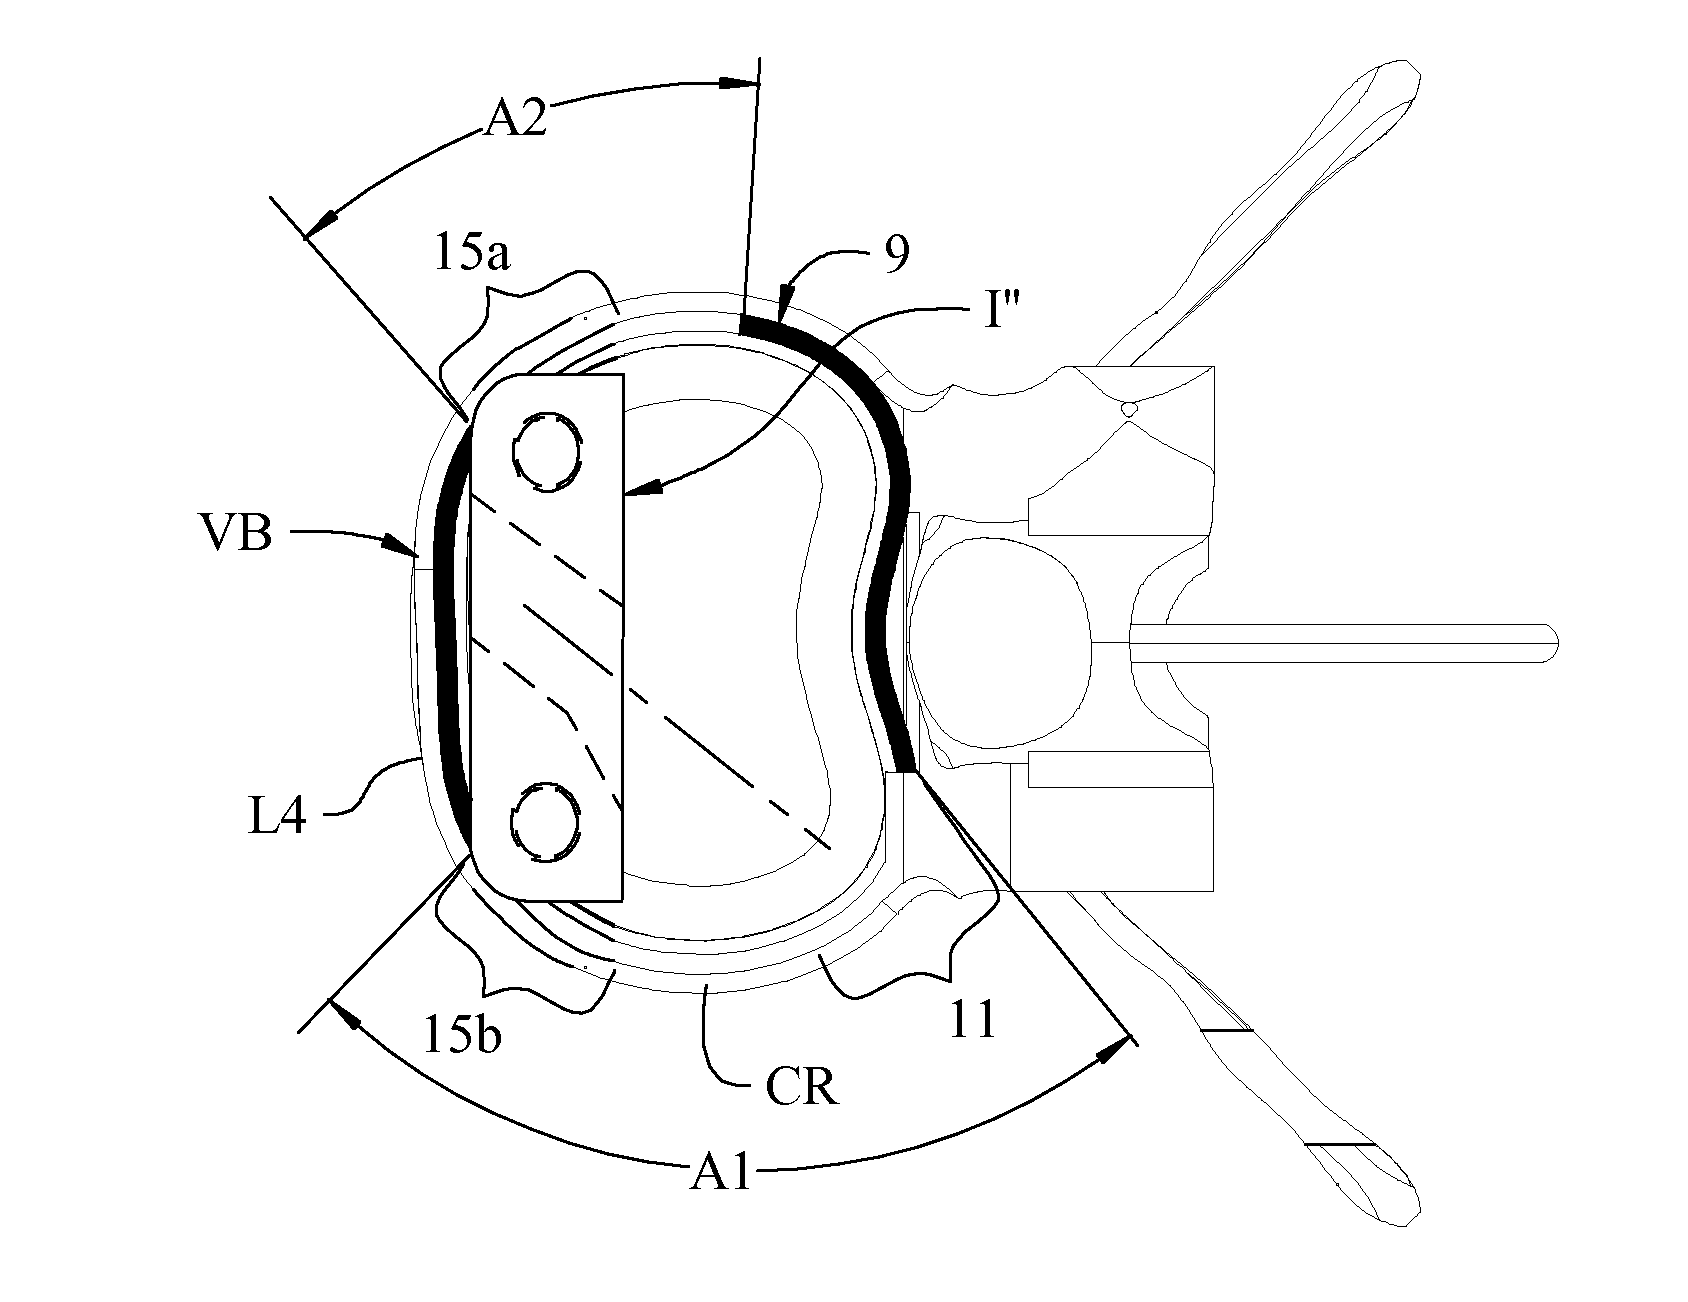 Expandable interbody implant and method